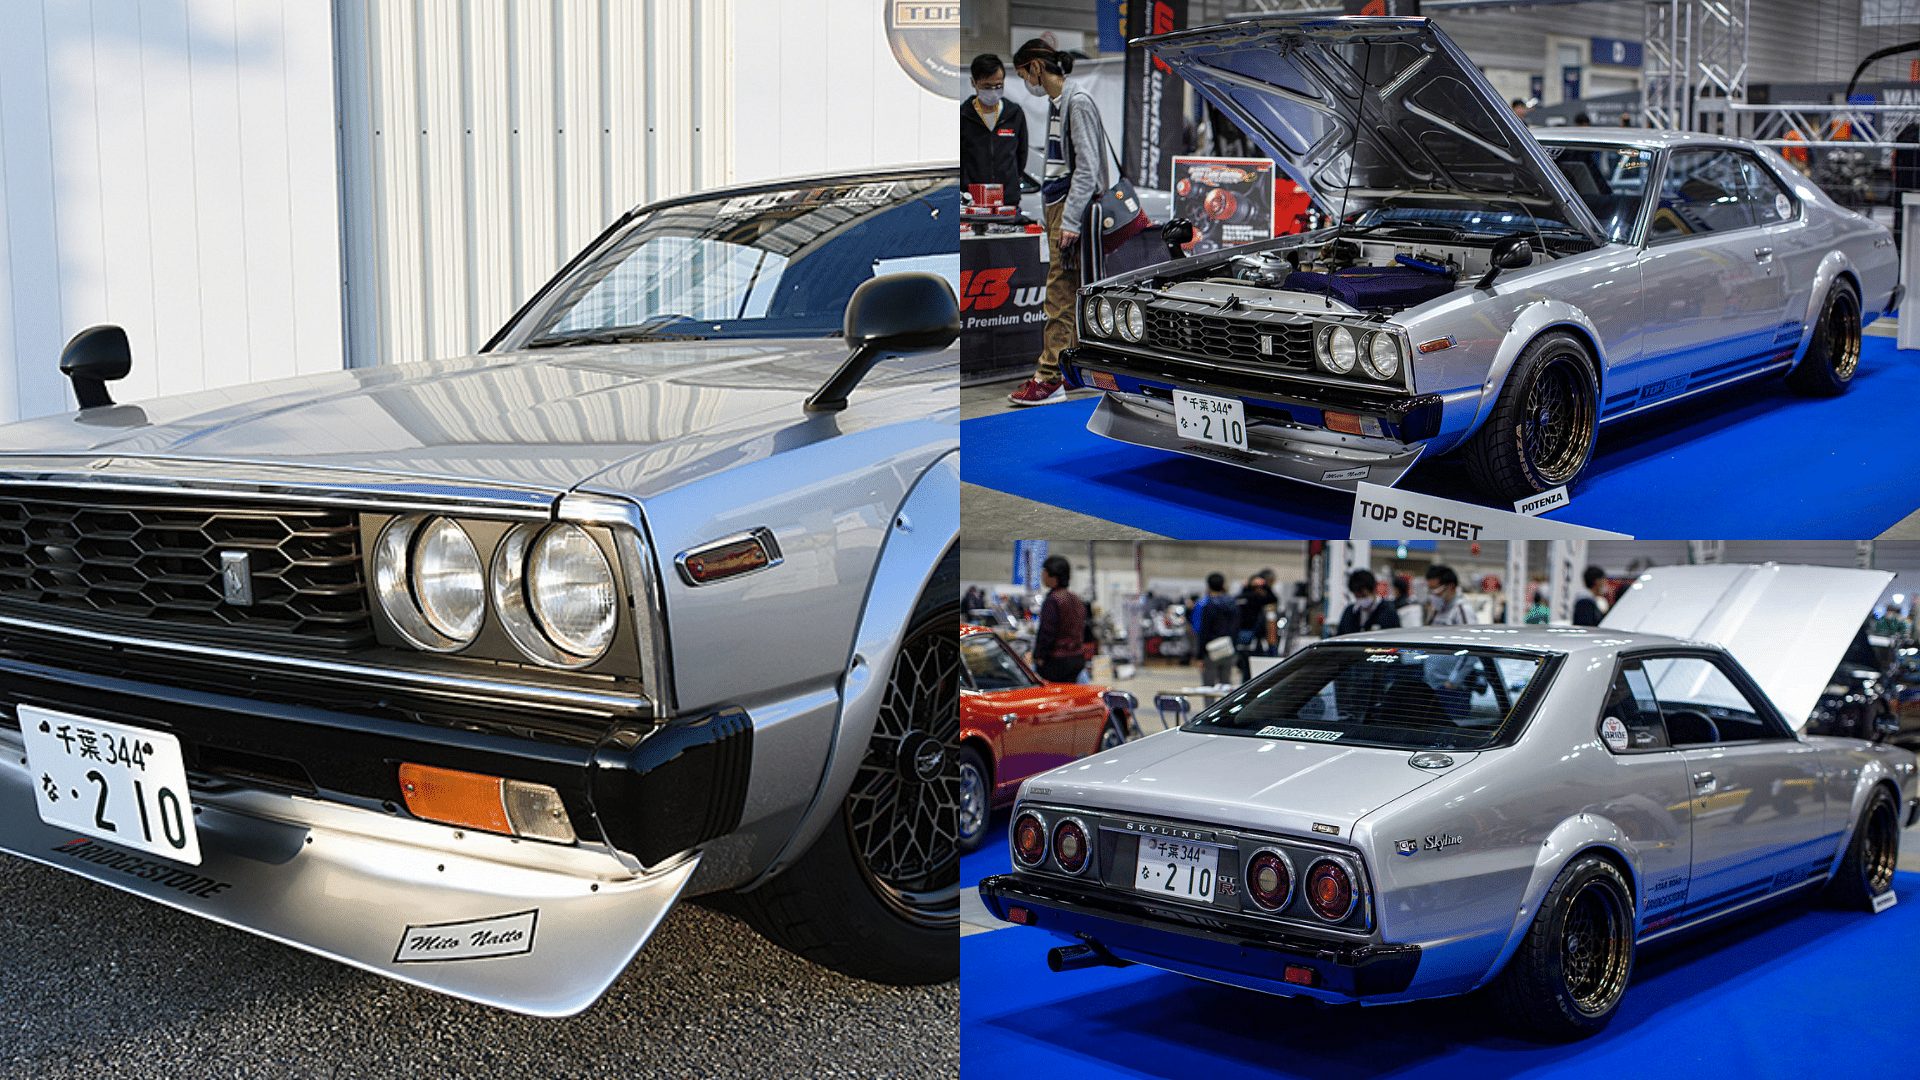 Nissan C210 Skyline GT-R front, side and back view